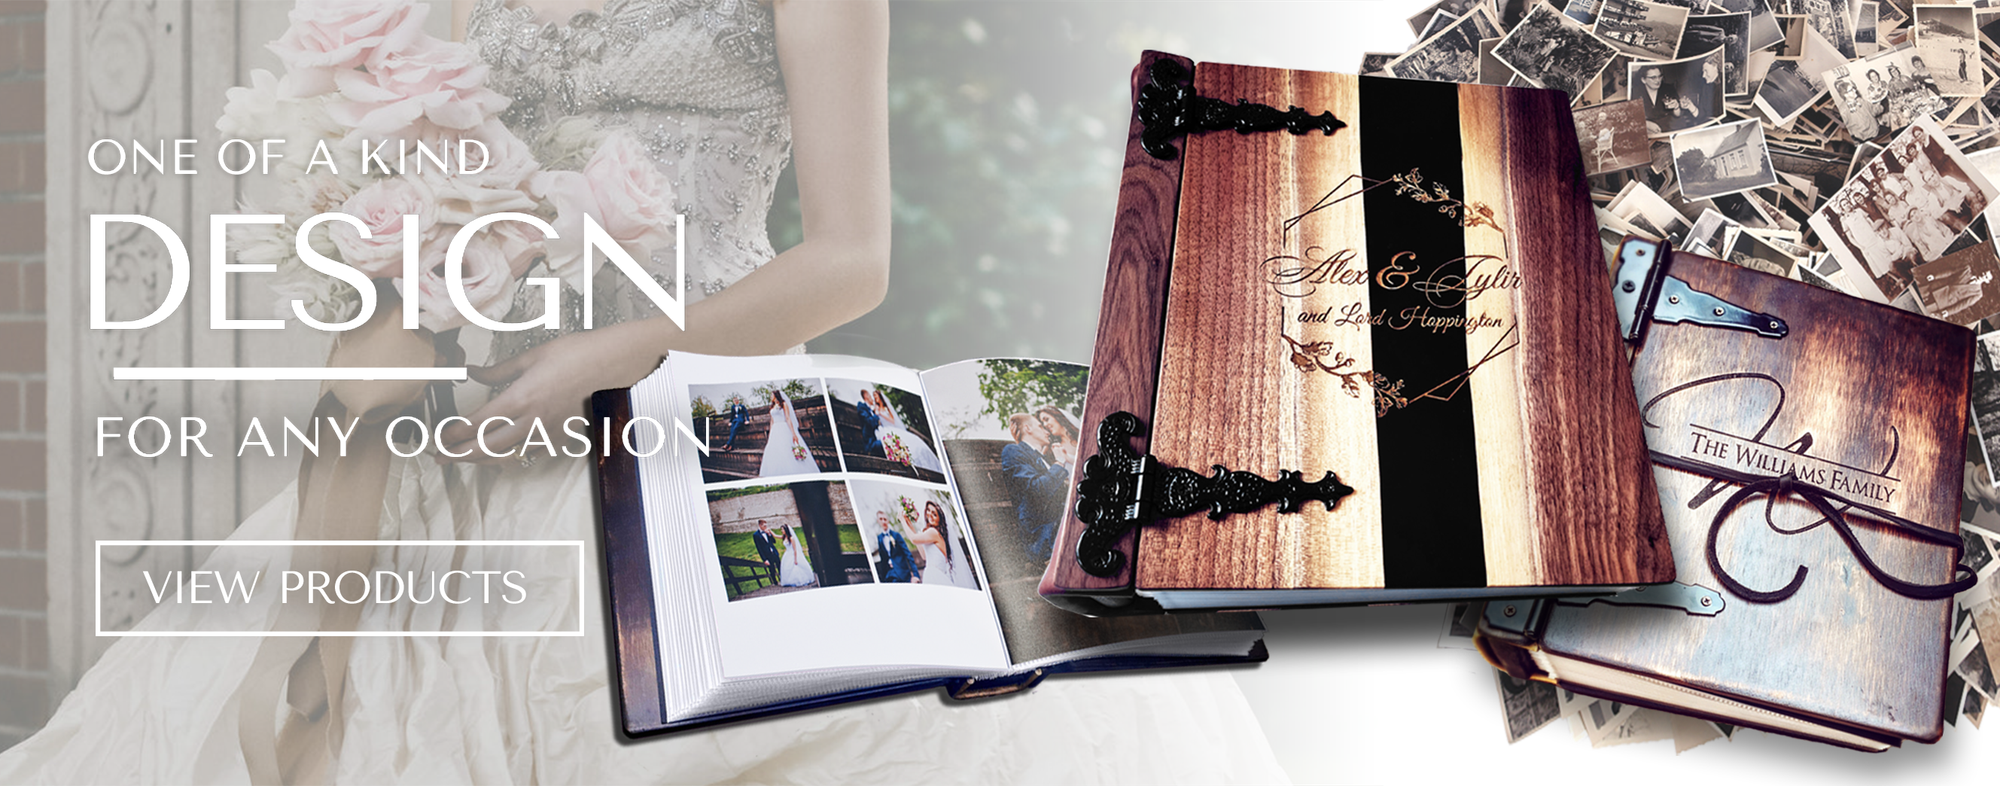 Rustic Engraved Fifth Wedding Anniversary Photo Book | Capture the Moments of Your Love with this Beautiful Photo Book - The Best Gift for Your Fifth Wedding Anniversary